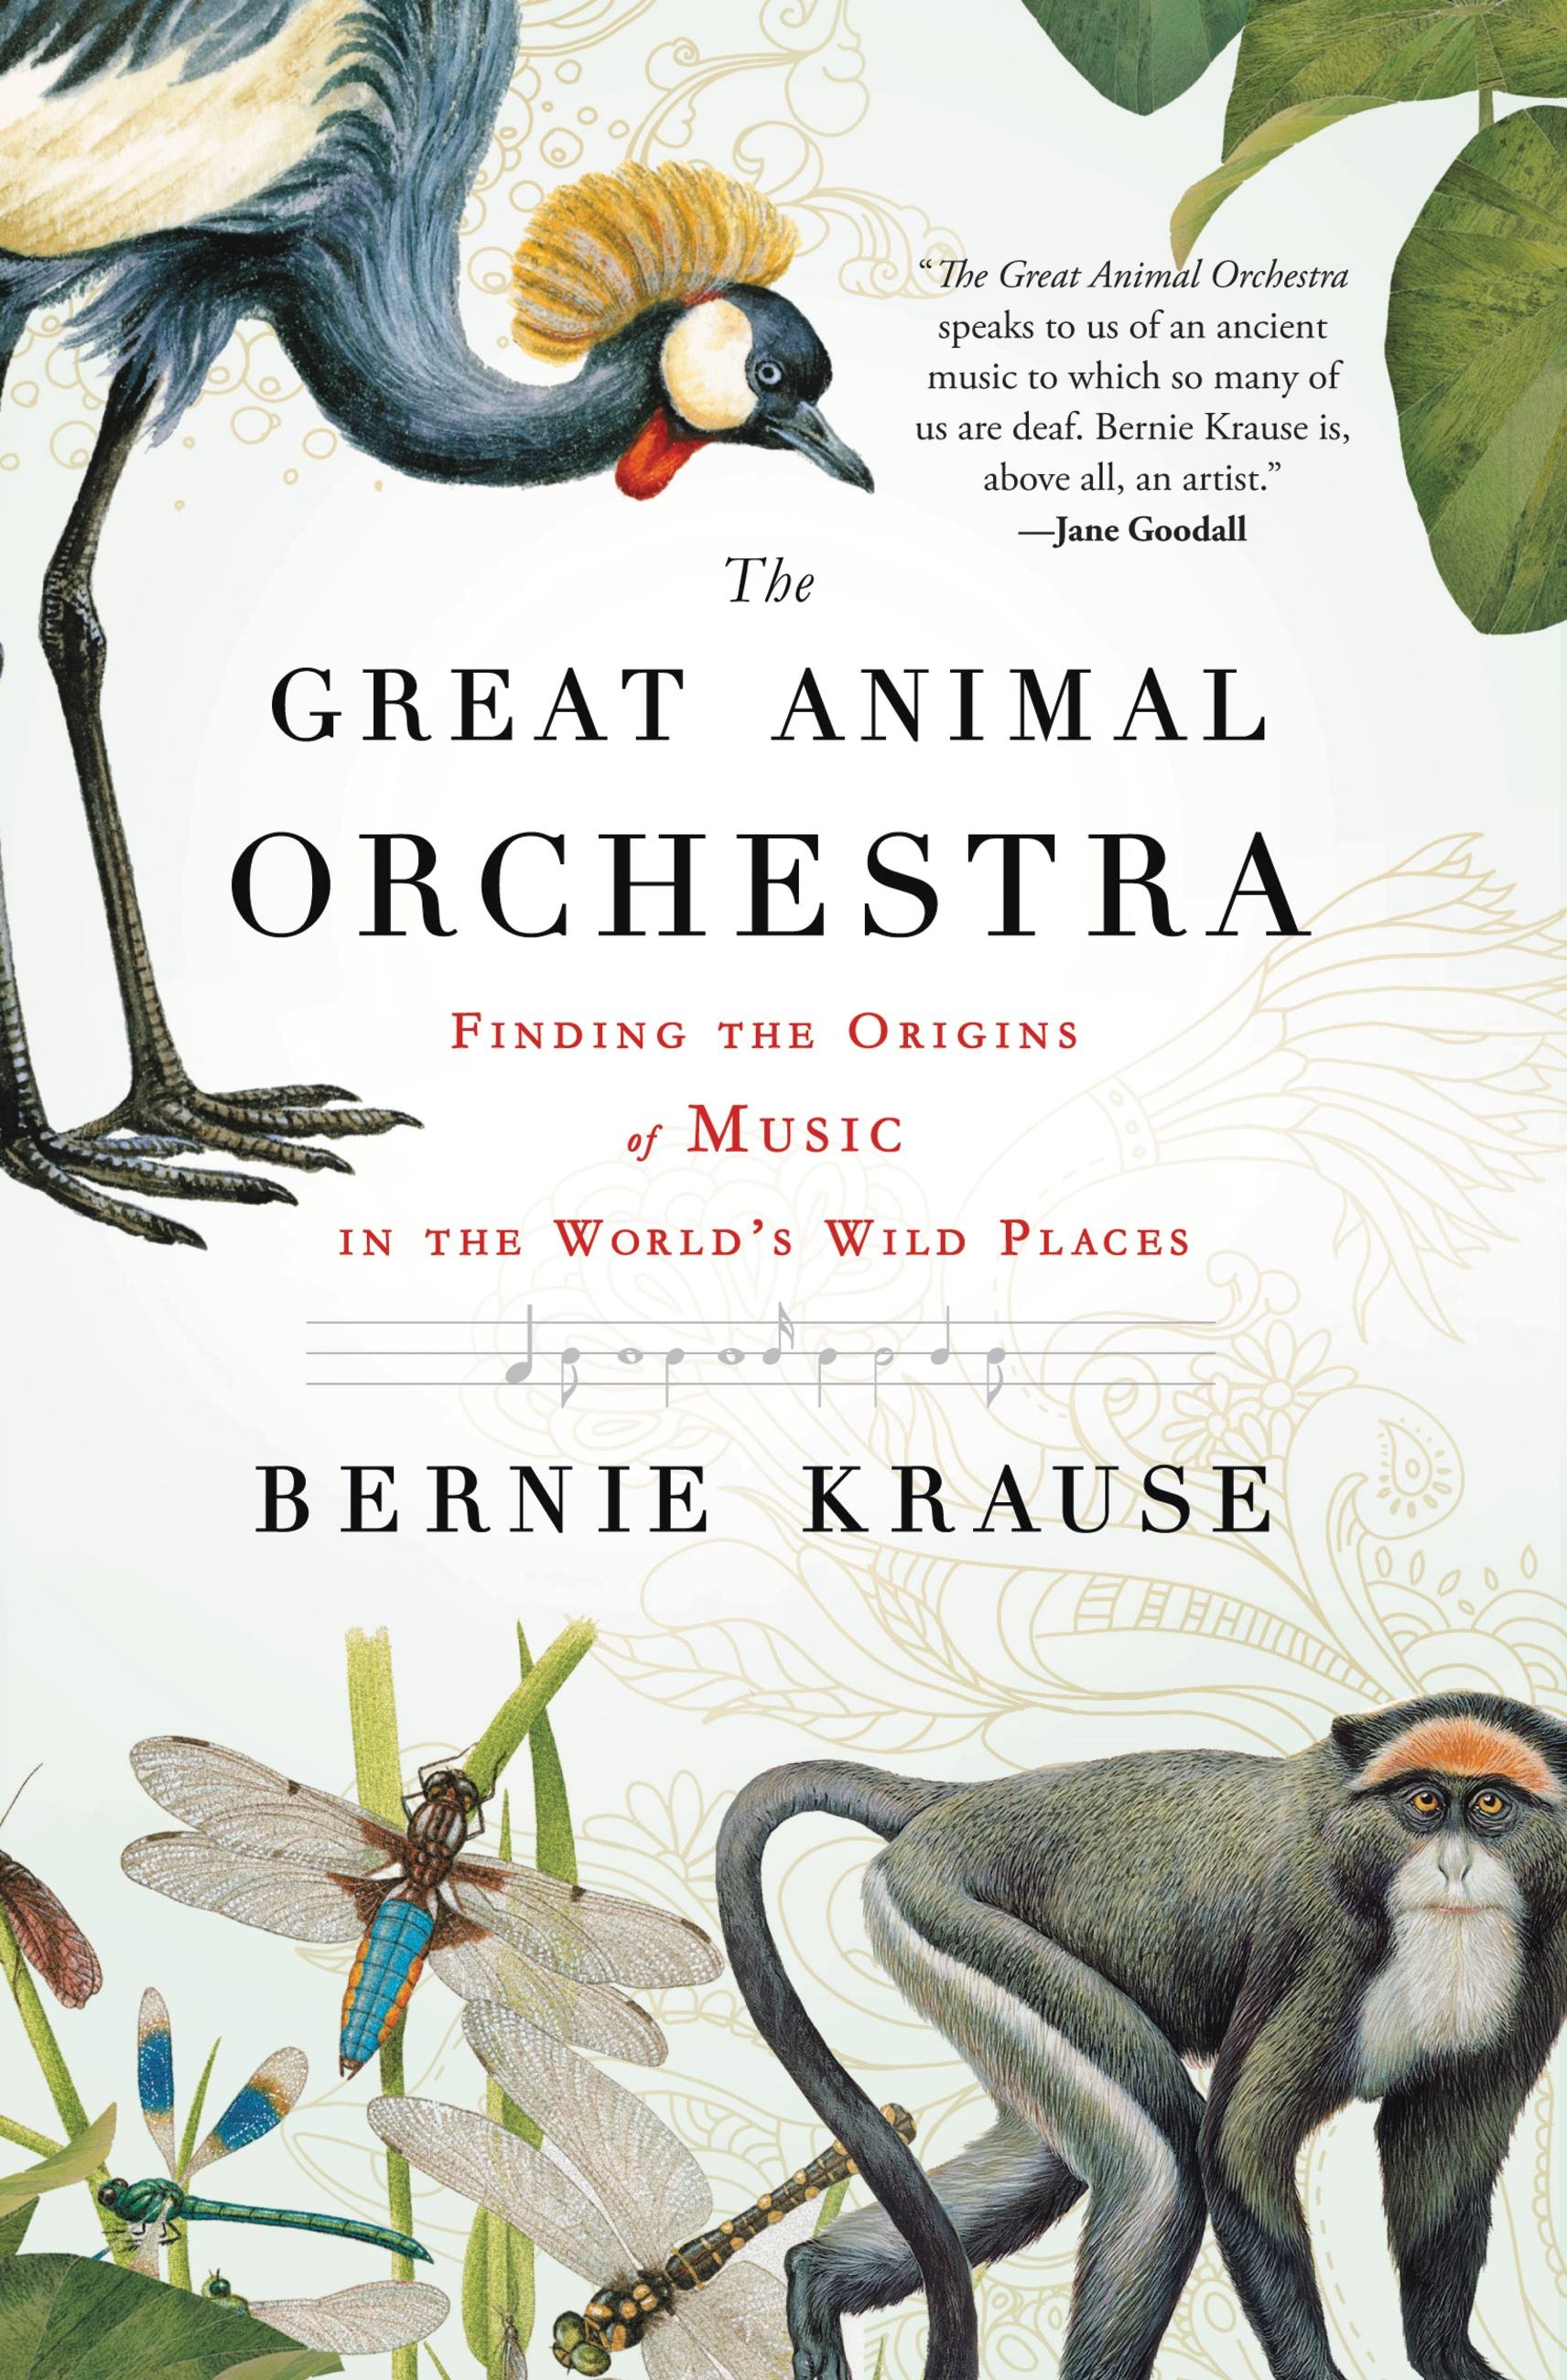 The Great Animal Orchestra by Bernie Krause | Little, Brown and Company